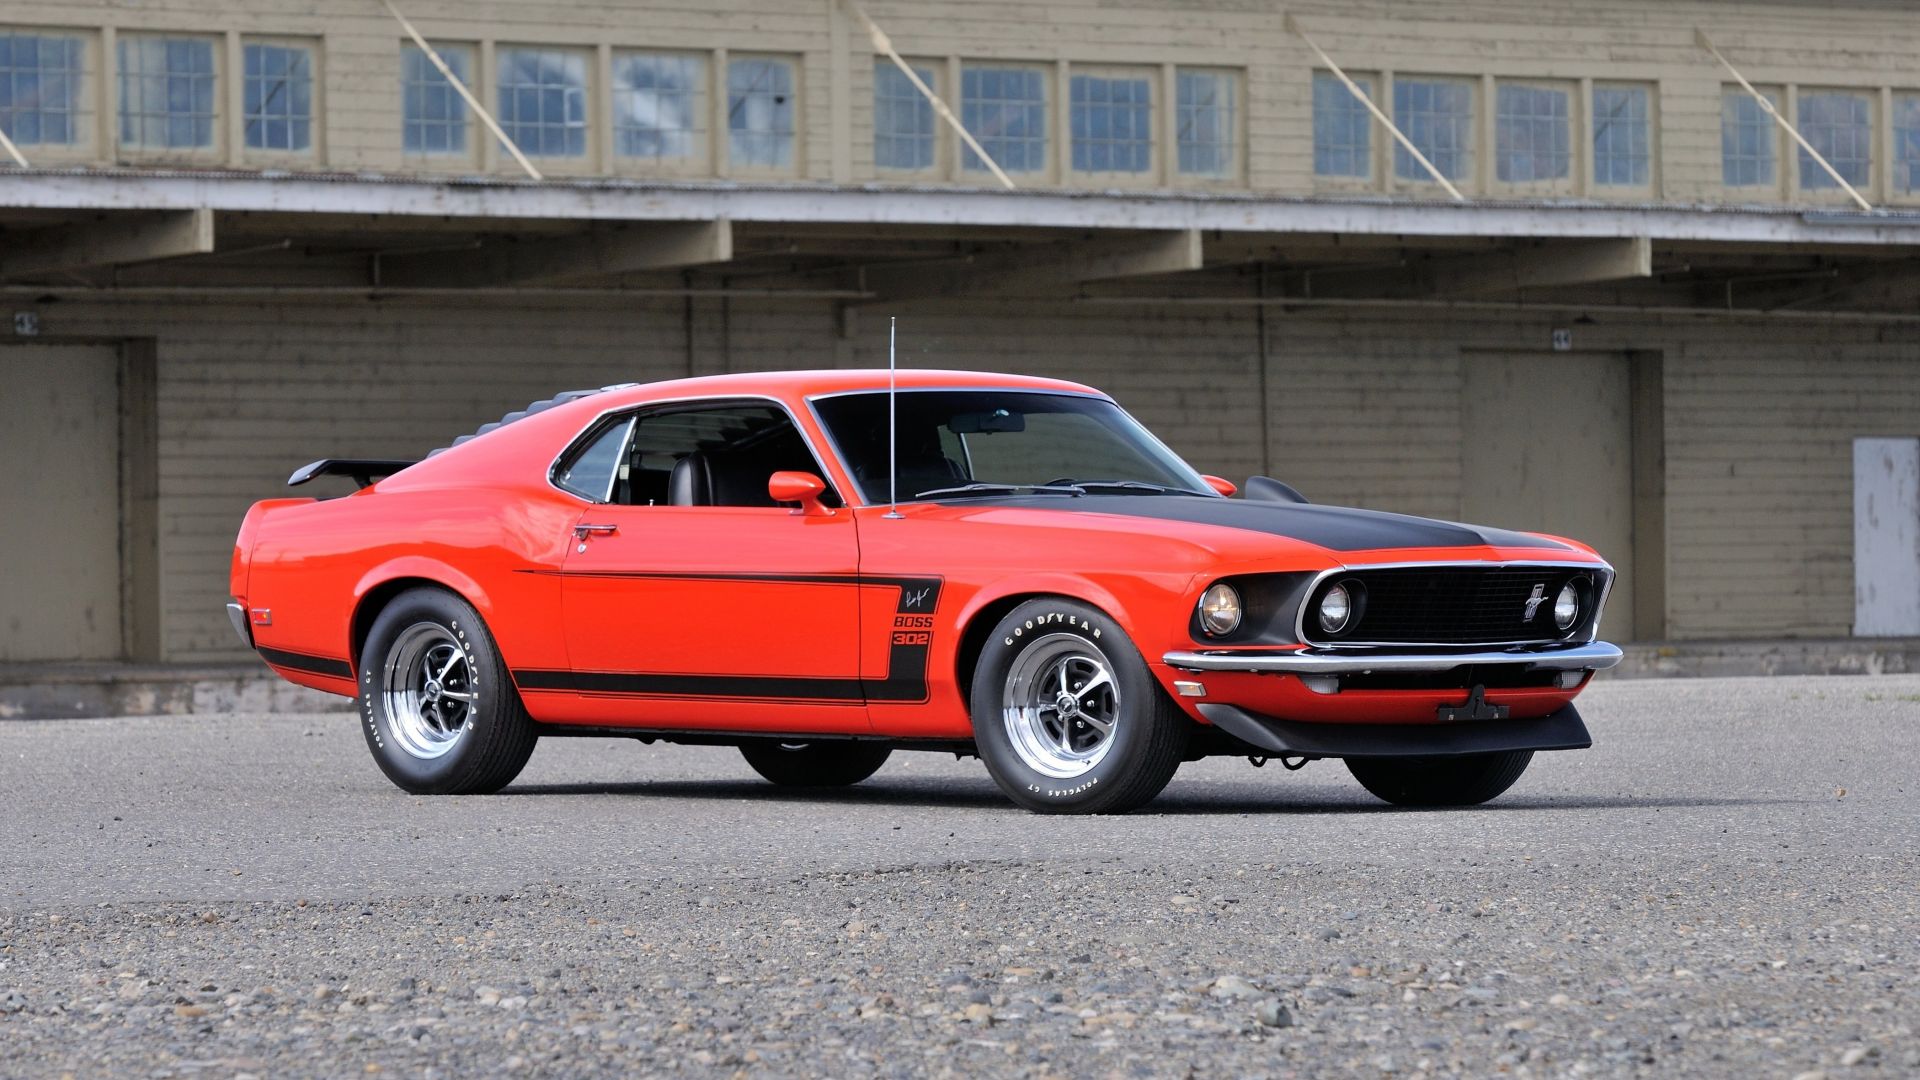 Ford mustang boss 302 HD wallpaper, HD image, background